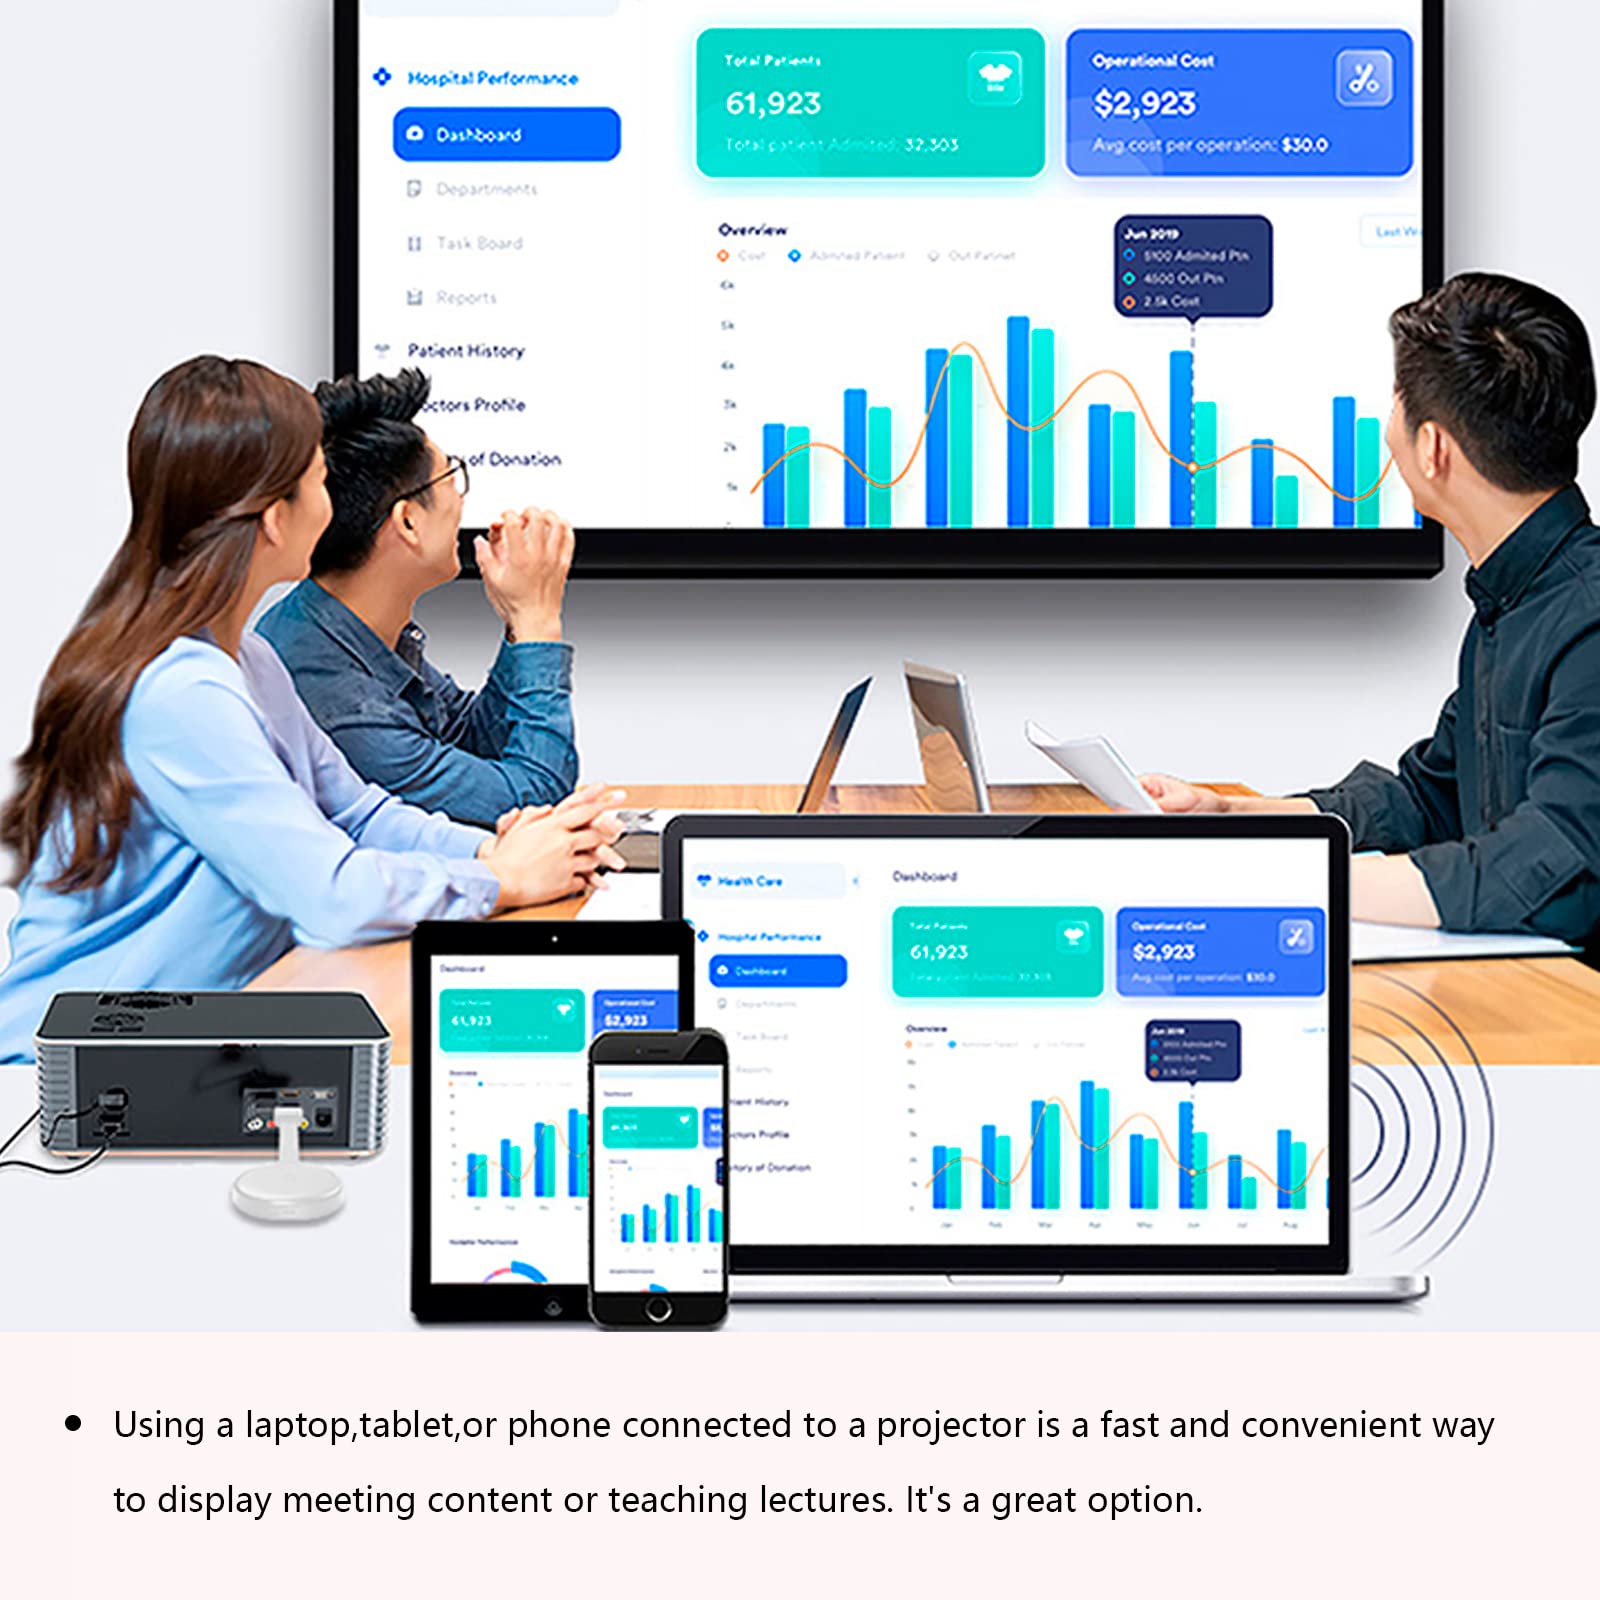 Wireless HDMI Display Dongle Adapter,TV Adapter for The APP YouTube,Video Mirroring Dongle Receiver,Used for iPhone Mac iOS Android Casting/Mirroring to TV/Projector/Monitor